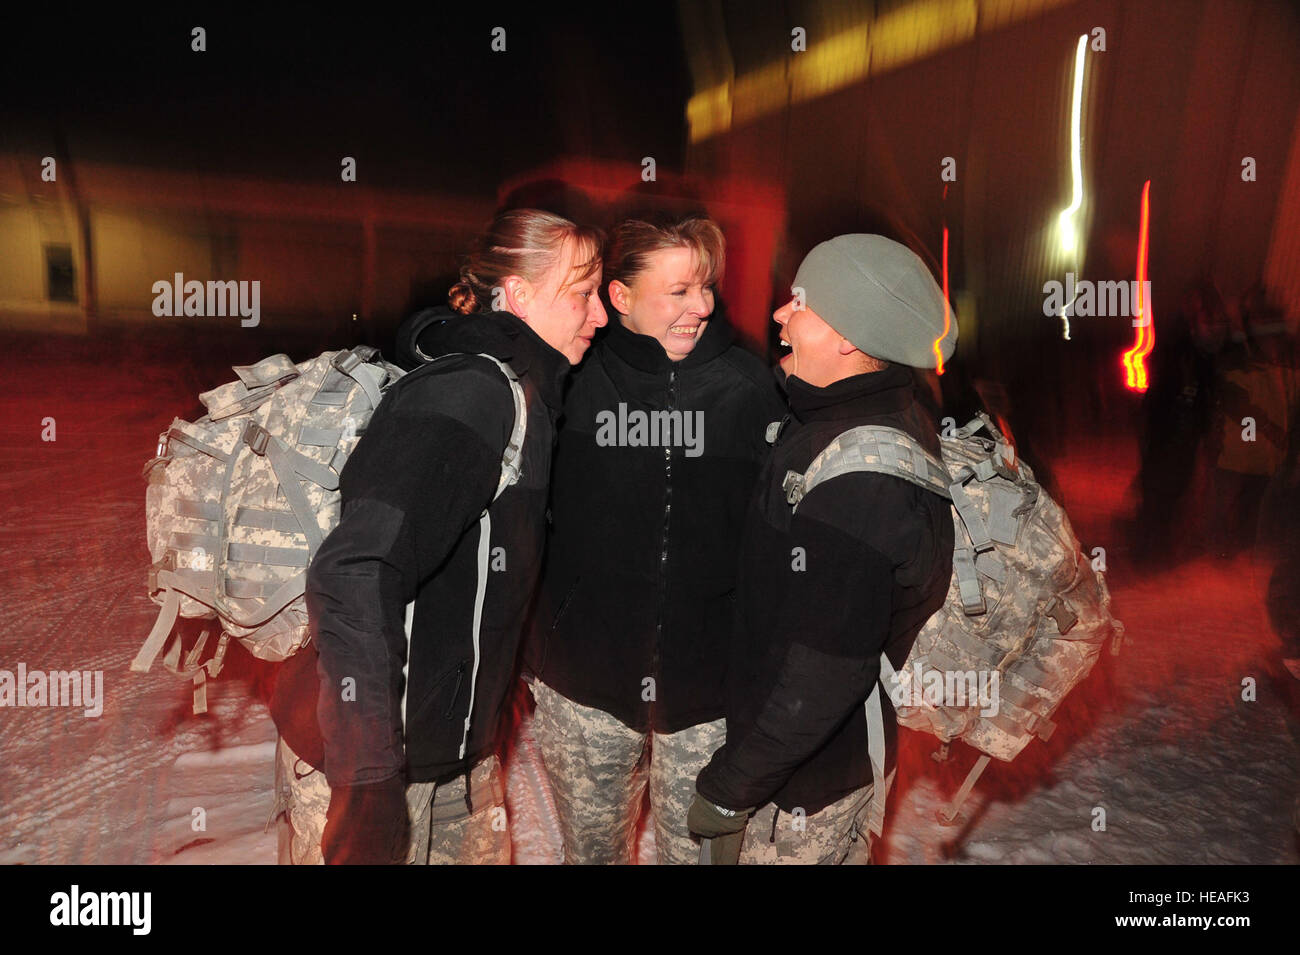 Colorado Army National Guard Staff Sgt. Laura VanGilder (center) greets two of her friends returning from Iraq at the JetCenter in Colorado Springs, Colo., Dec. 17. Sgt. 1st Class Kristy Schwarts (left) and Sgt. 1st Class Denise Drummond (right) of the 220th Military Police Company, Colorado Army National Guard, left for pre-deployment training last January. While deployed, the 220th MP Company was assigned to Task Force 134 at Camp Cropper in Baghdad, where Soldiers were responsible for detainee operations; ensuring the care and safeguarding of detainees in conjunction with the Government of  Stock Photo